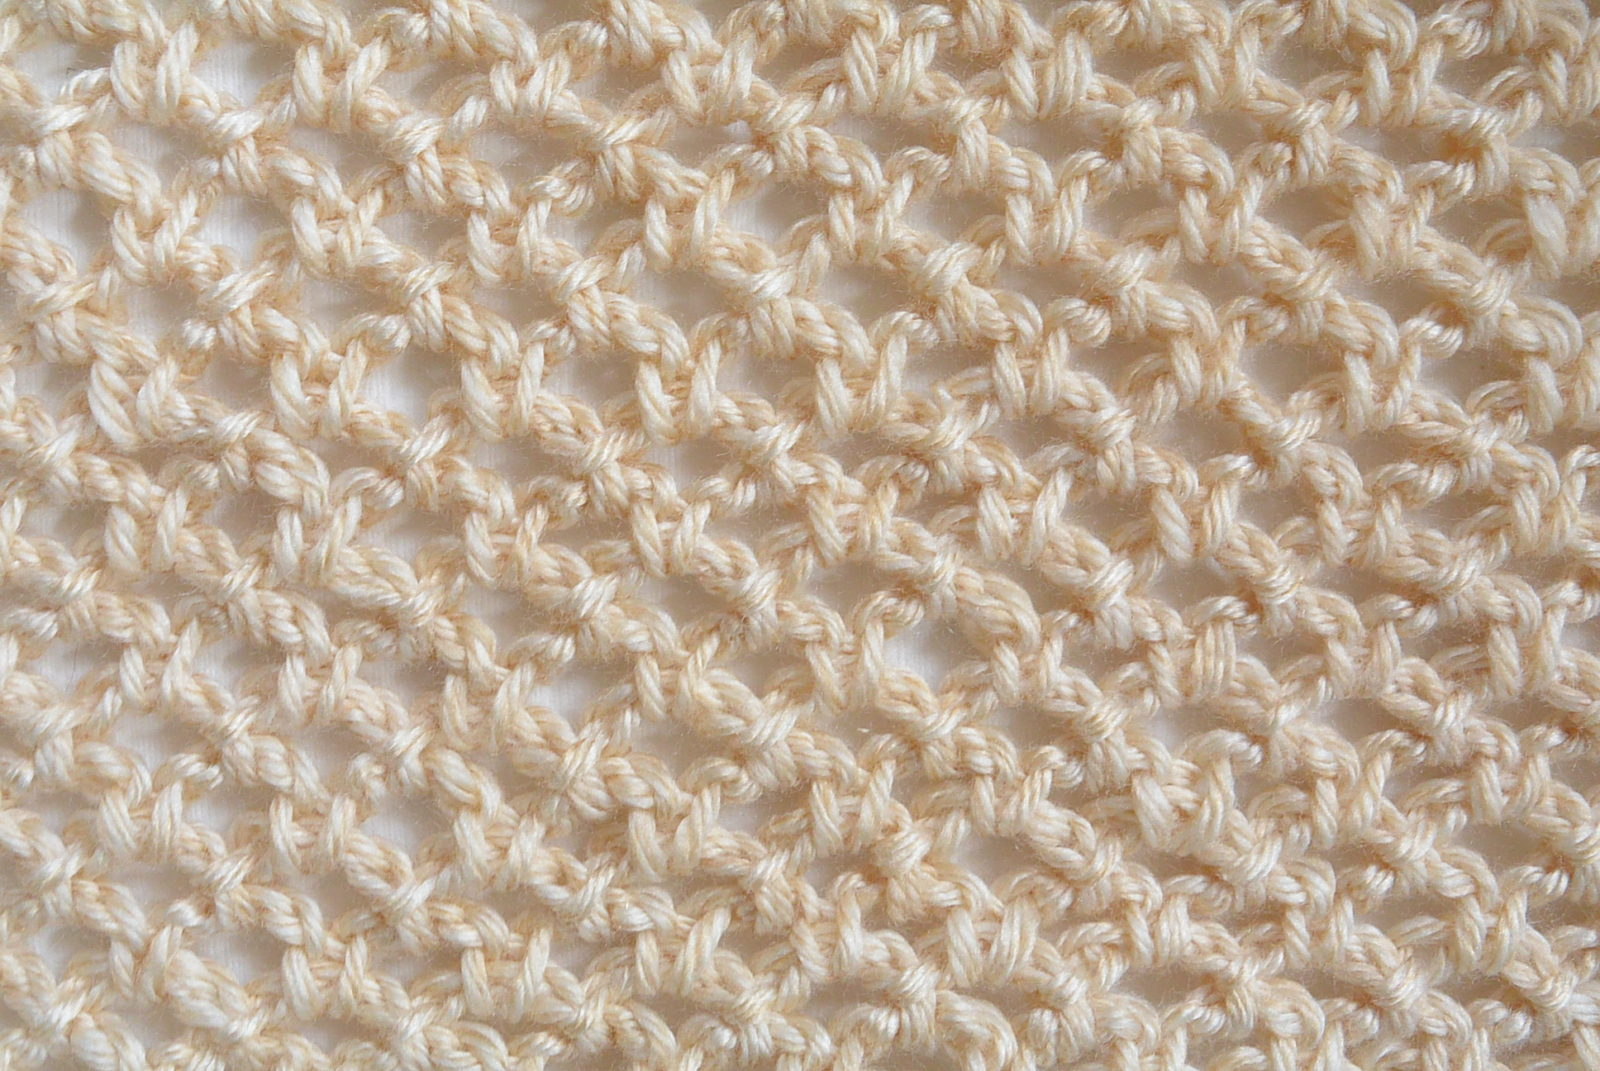 Mesh Scarf Crochet Pattern How To Crochet An Easy Mesh Stitch Mama In A Stitch